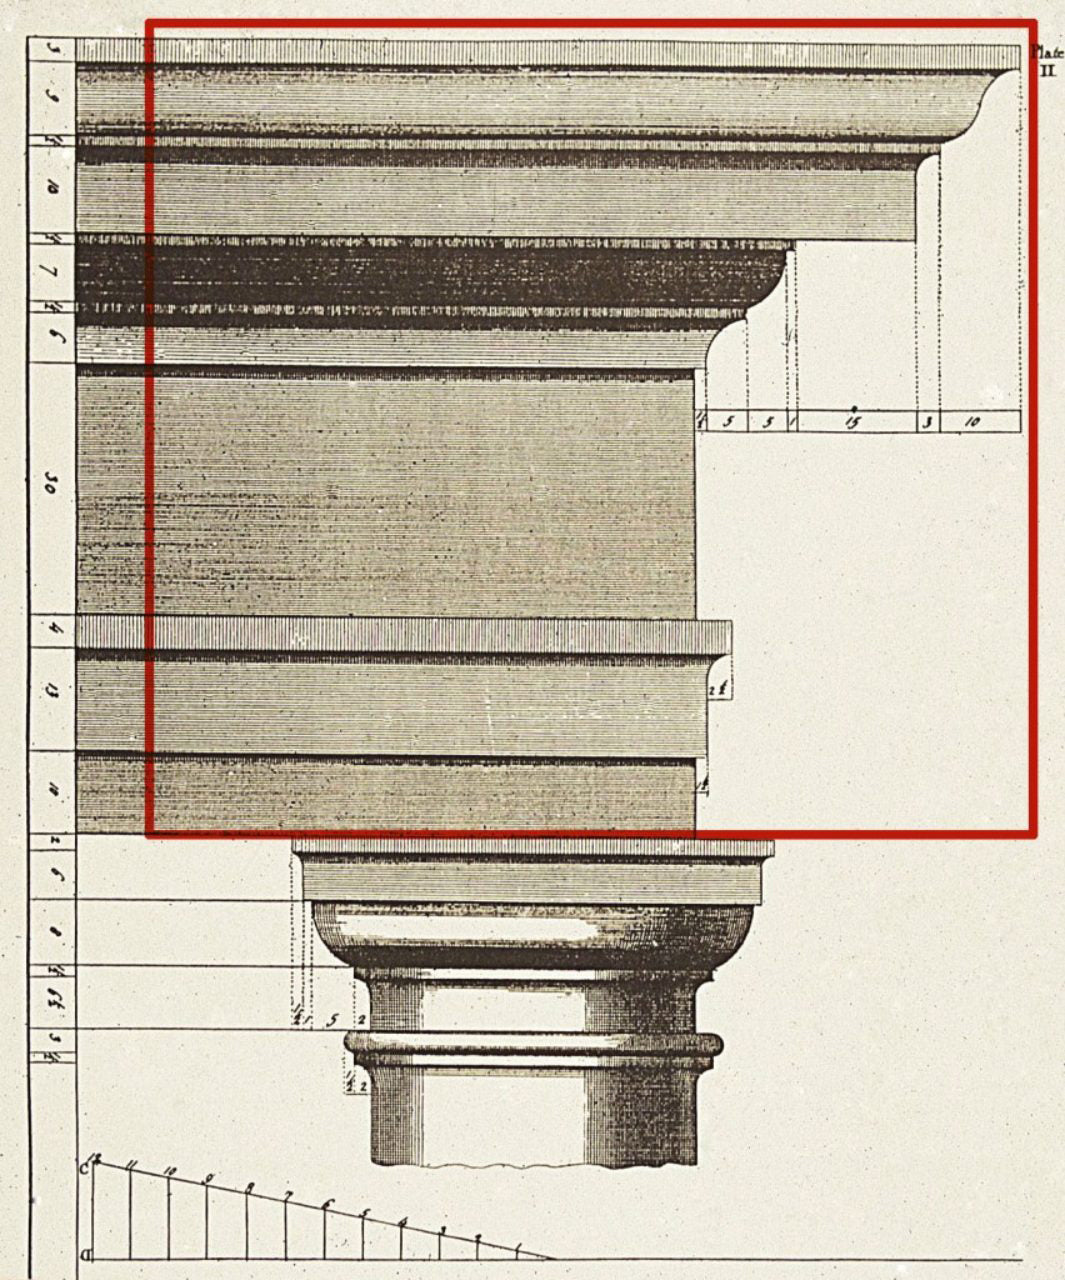 Entablature Illustrated Example - Classical Architectural Glossary by ColumnsDirect.com